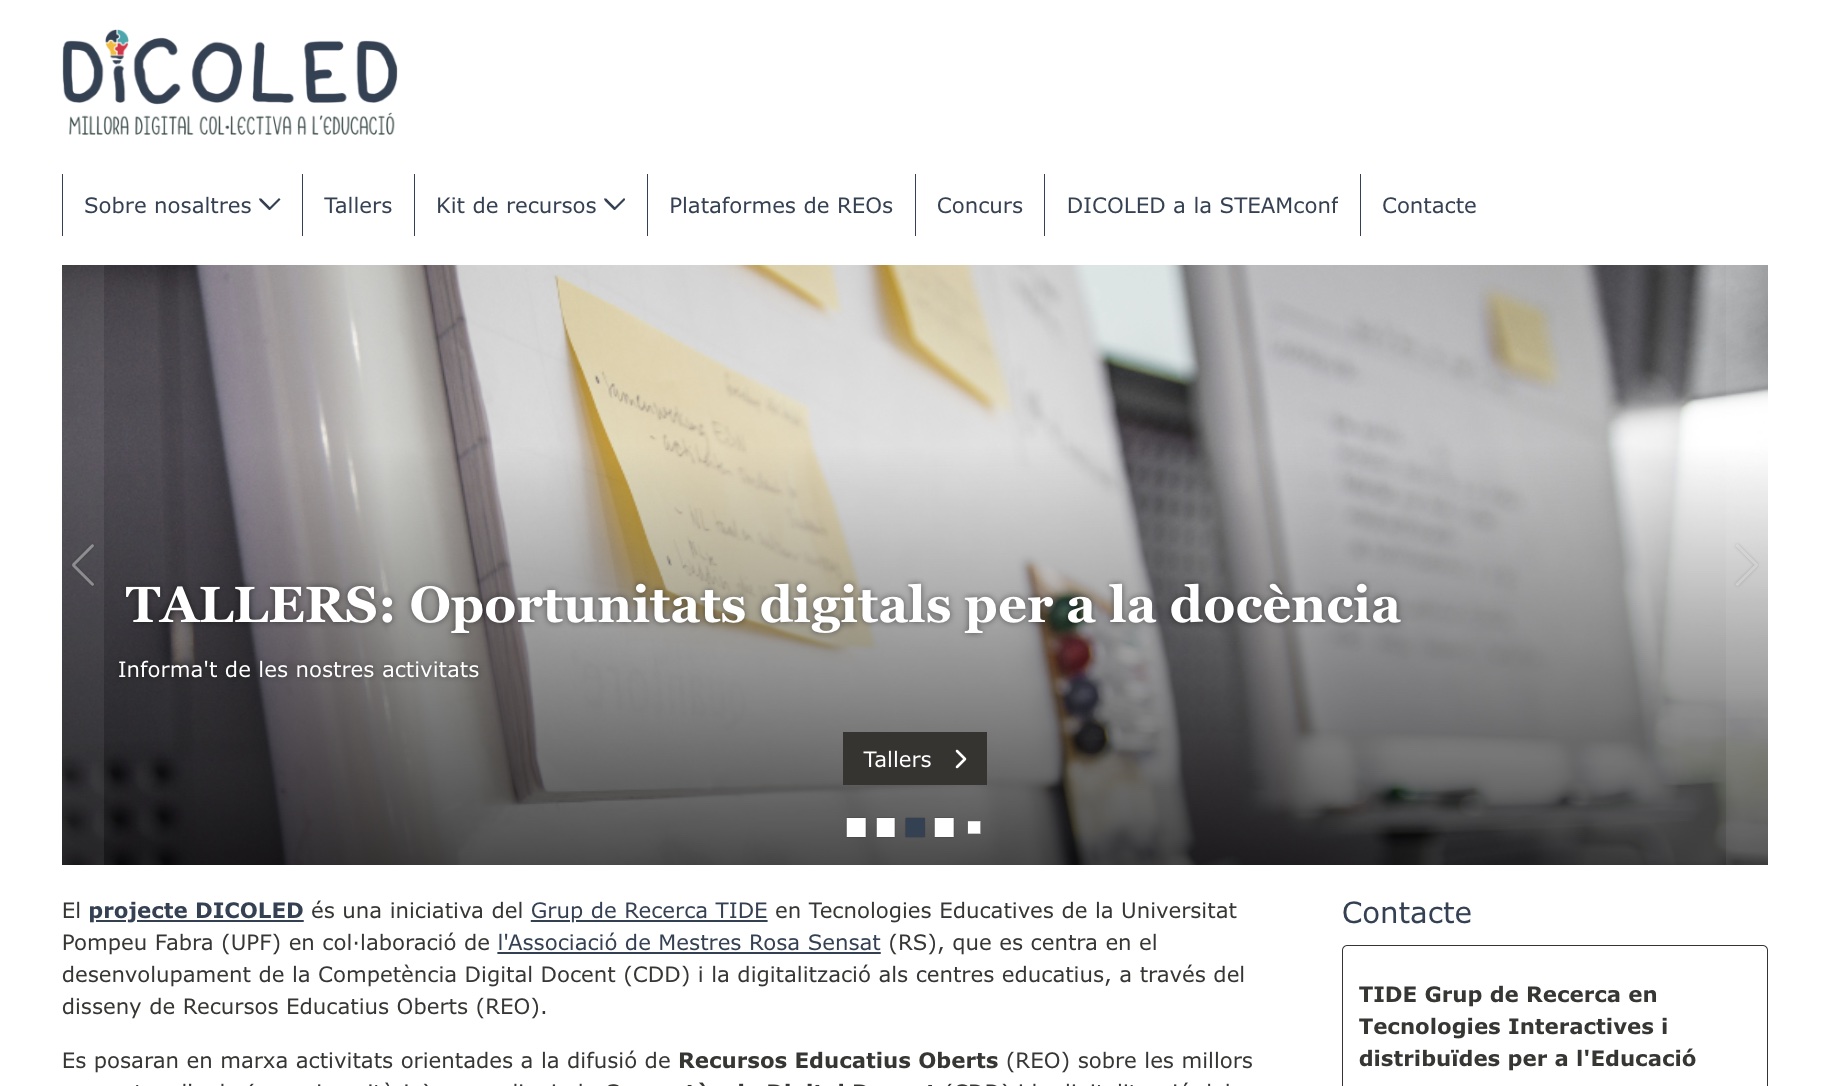 DICOLED project actively disseminating RemixED to teachers in Catalonia